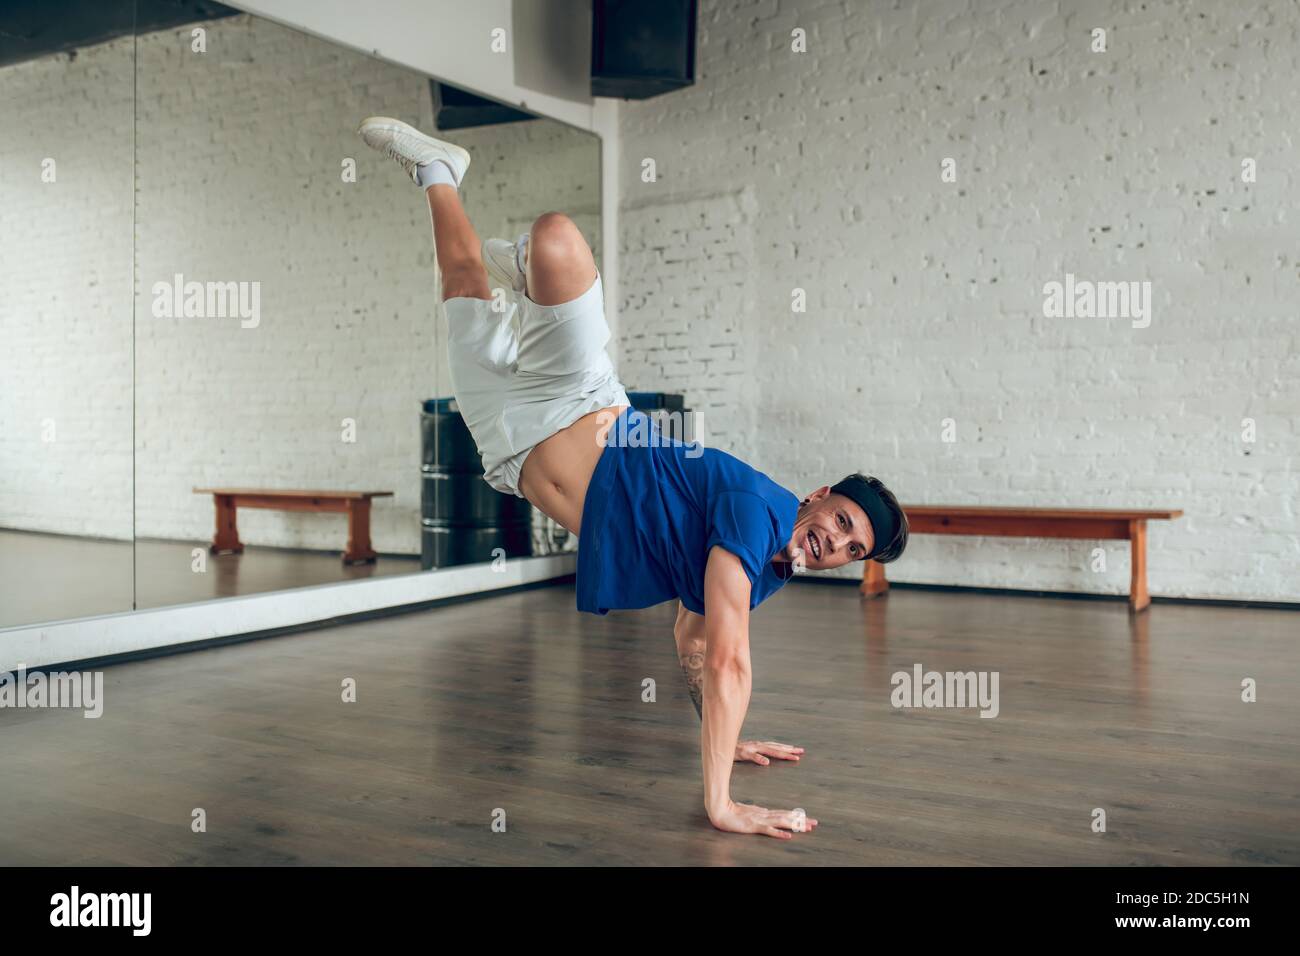 Man doing a handstand on the floor while dancing Stock Photo